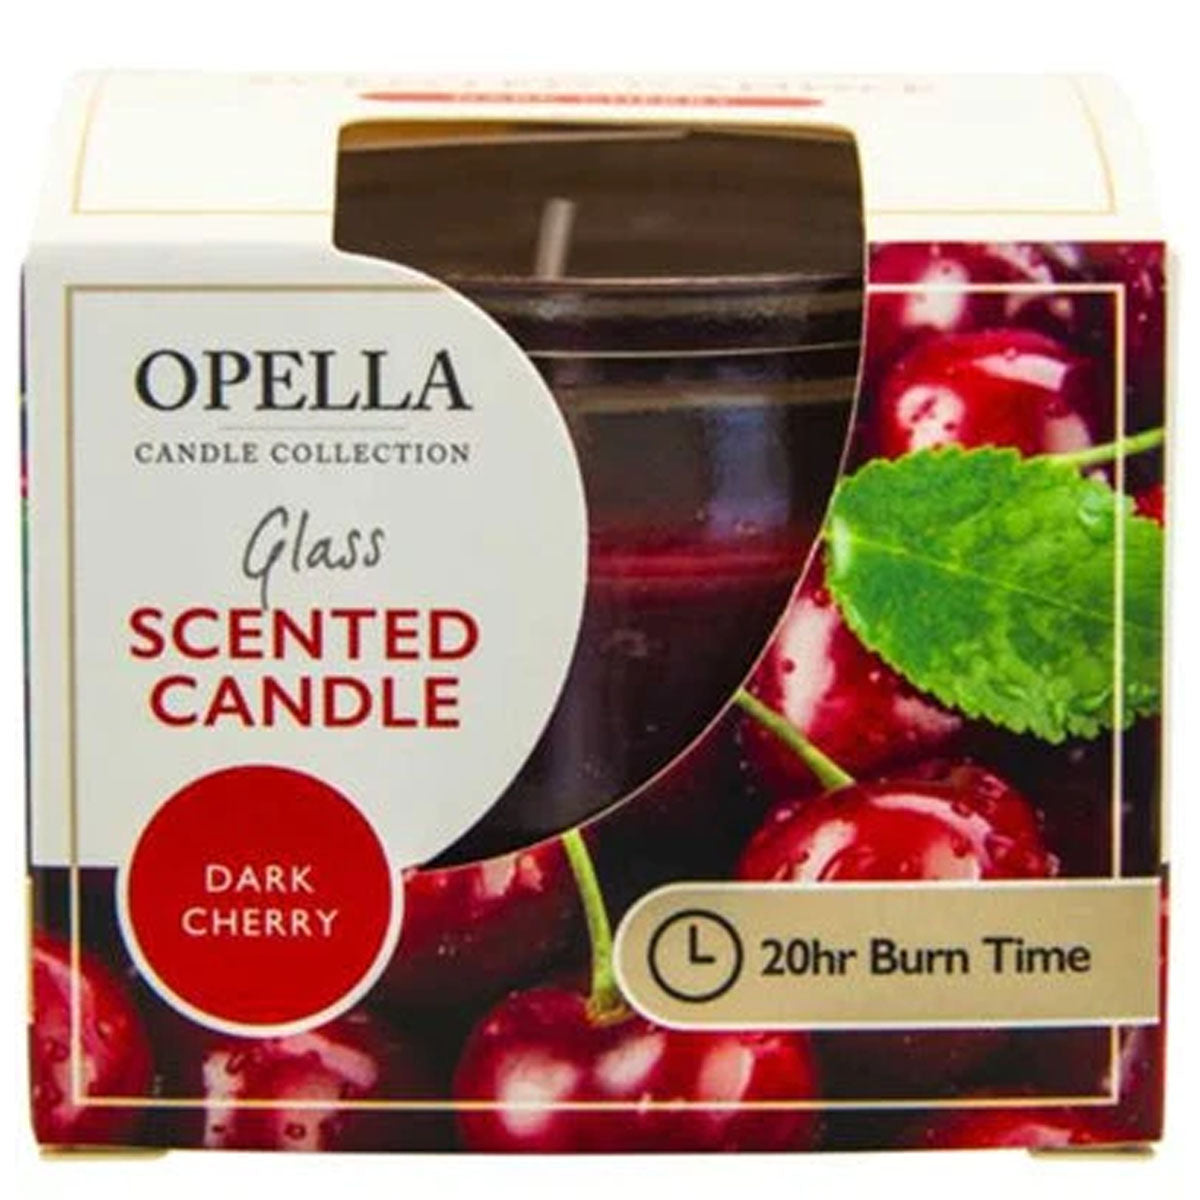 Opella glass scented candle dark cherry fragrance burn time.